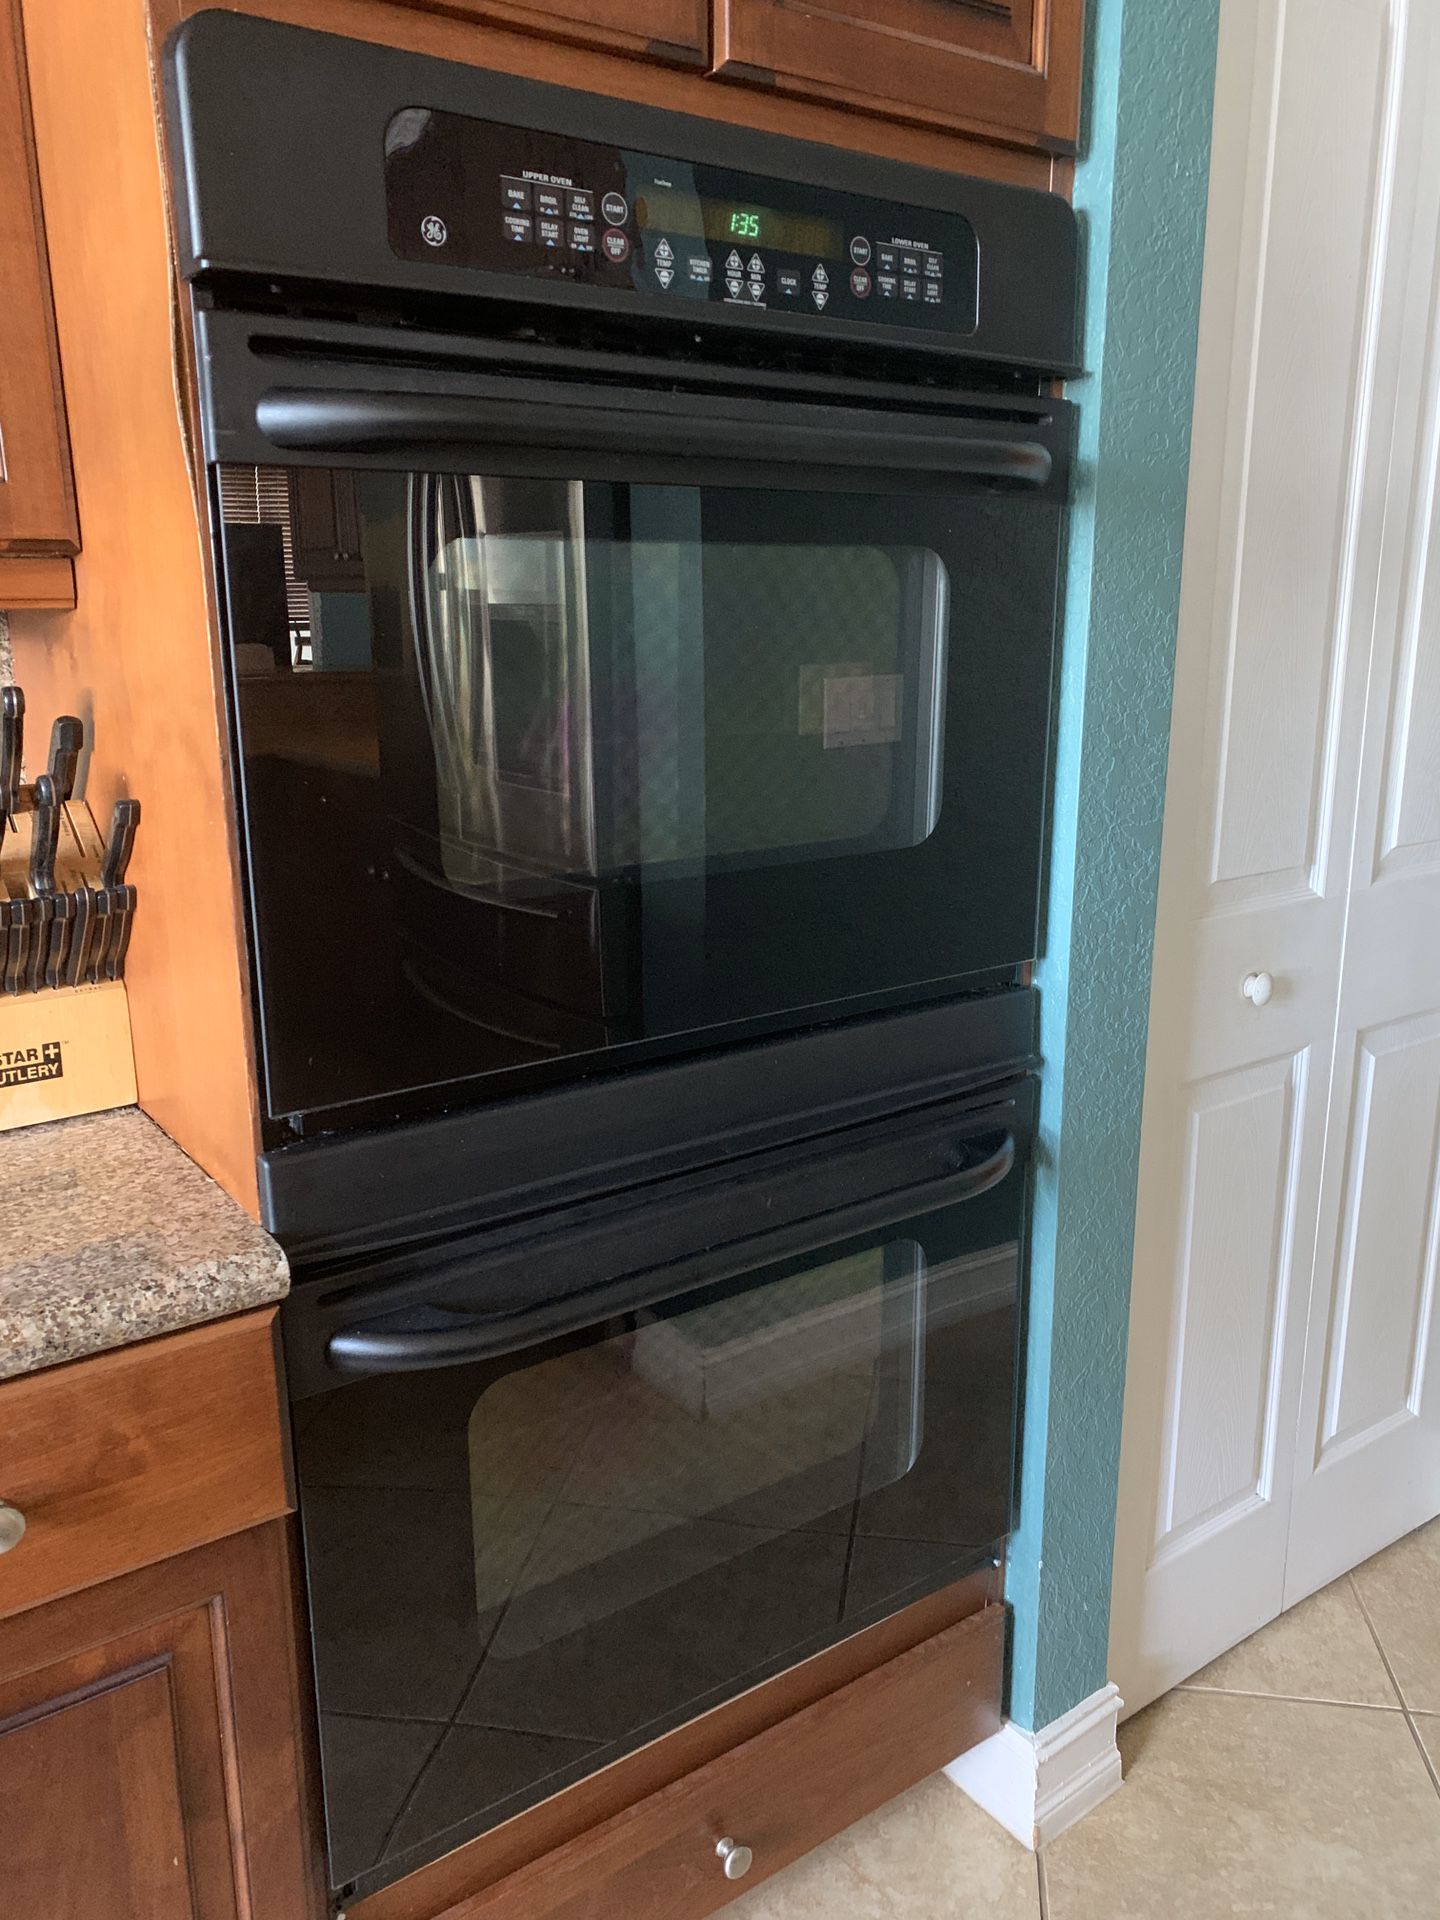 Ge Profile Suite Kitchen Appliances Double Oven Cooktop And Dishwasher In Black 800 For Sale In Boynton Beach Fl Offerup